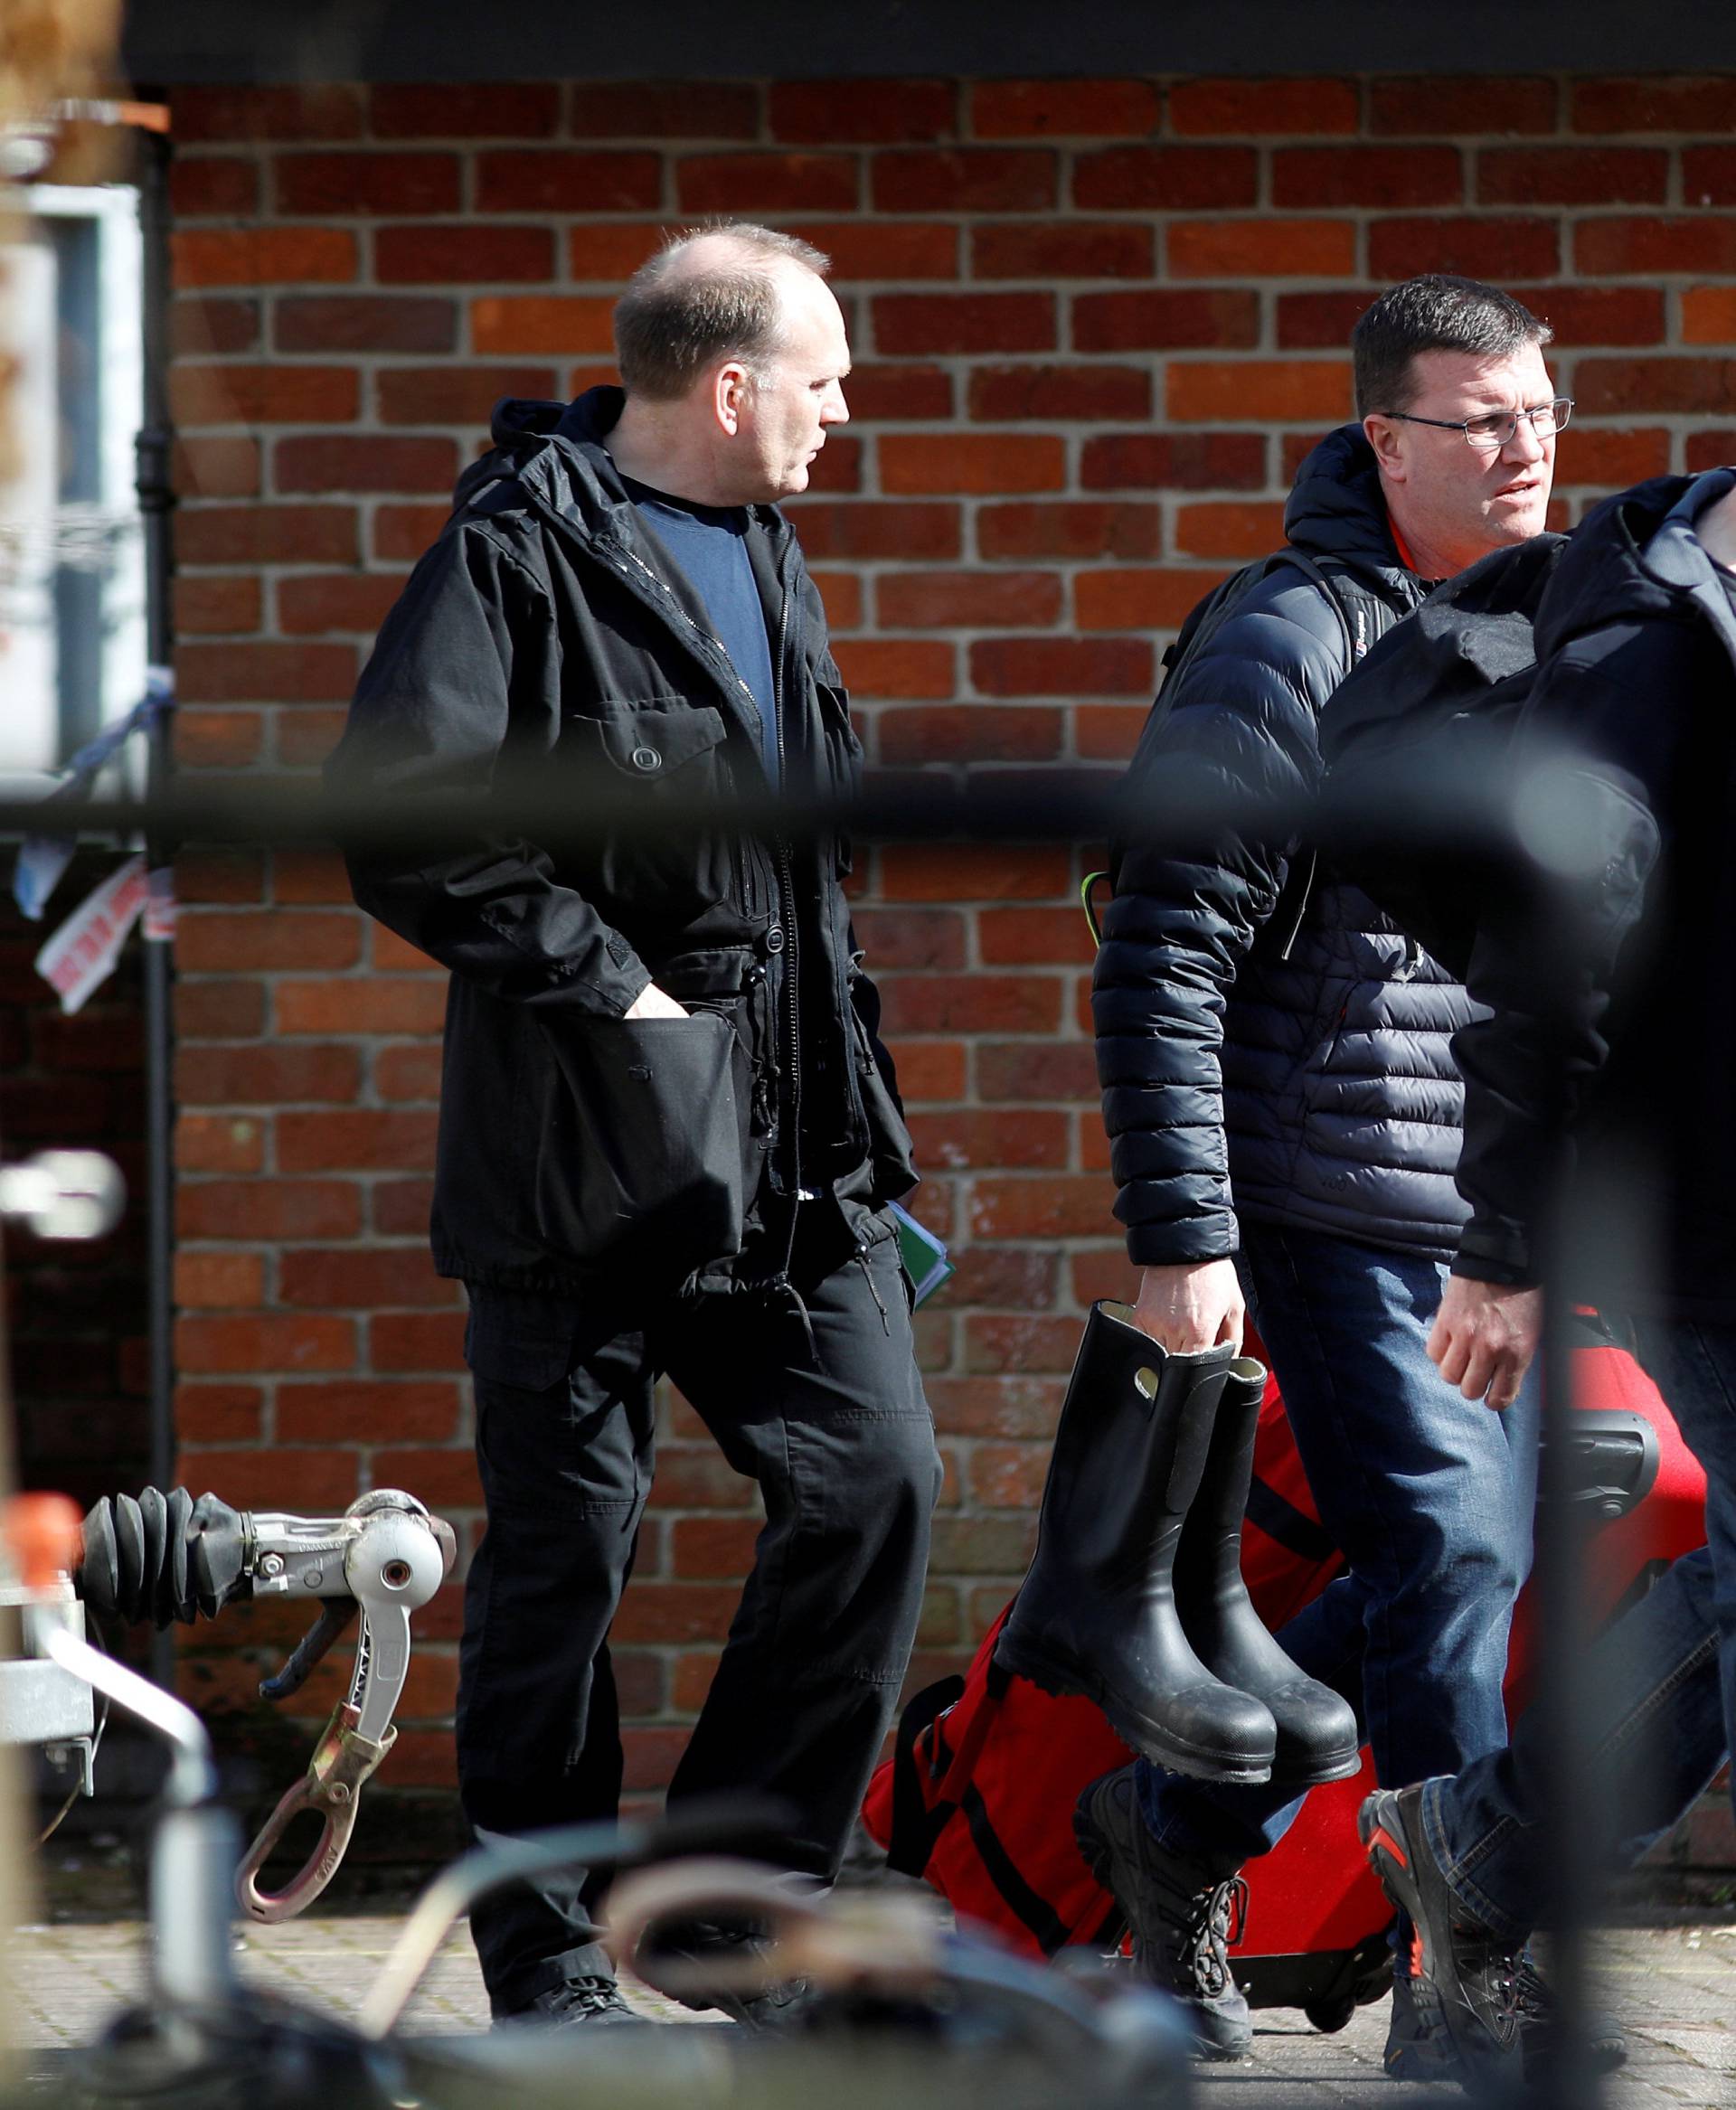 FILE PHOTO: Inspectors from the Organisation for the Prohibition of Chemical Weapons (OPCW) arrive to begin work at the scene of the nerve agent attack on former Russian spy Sergei Skripal, in Salisbury, Britain